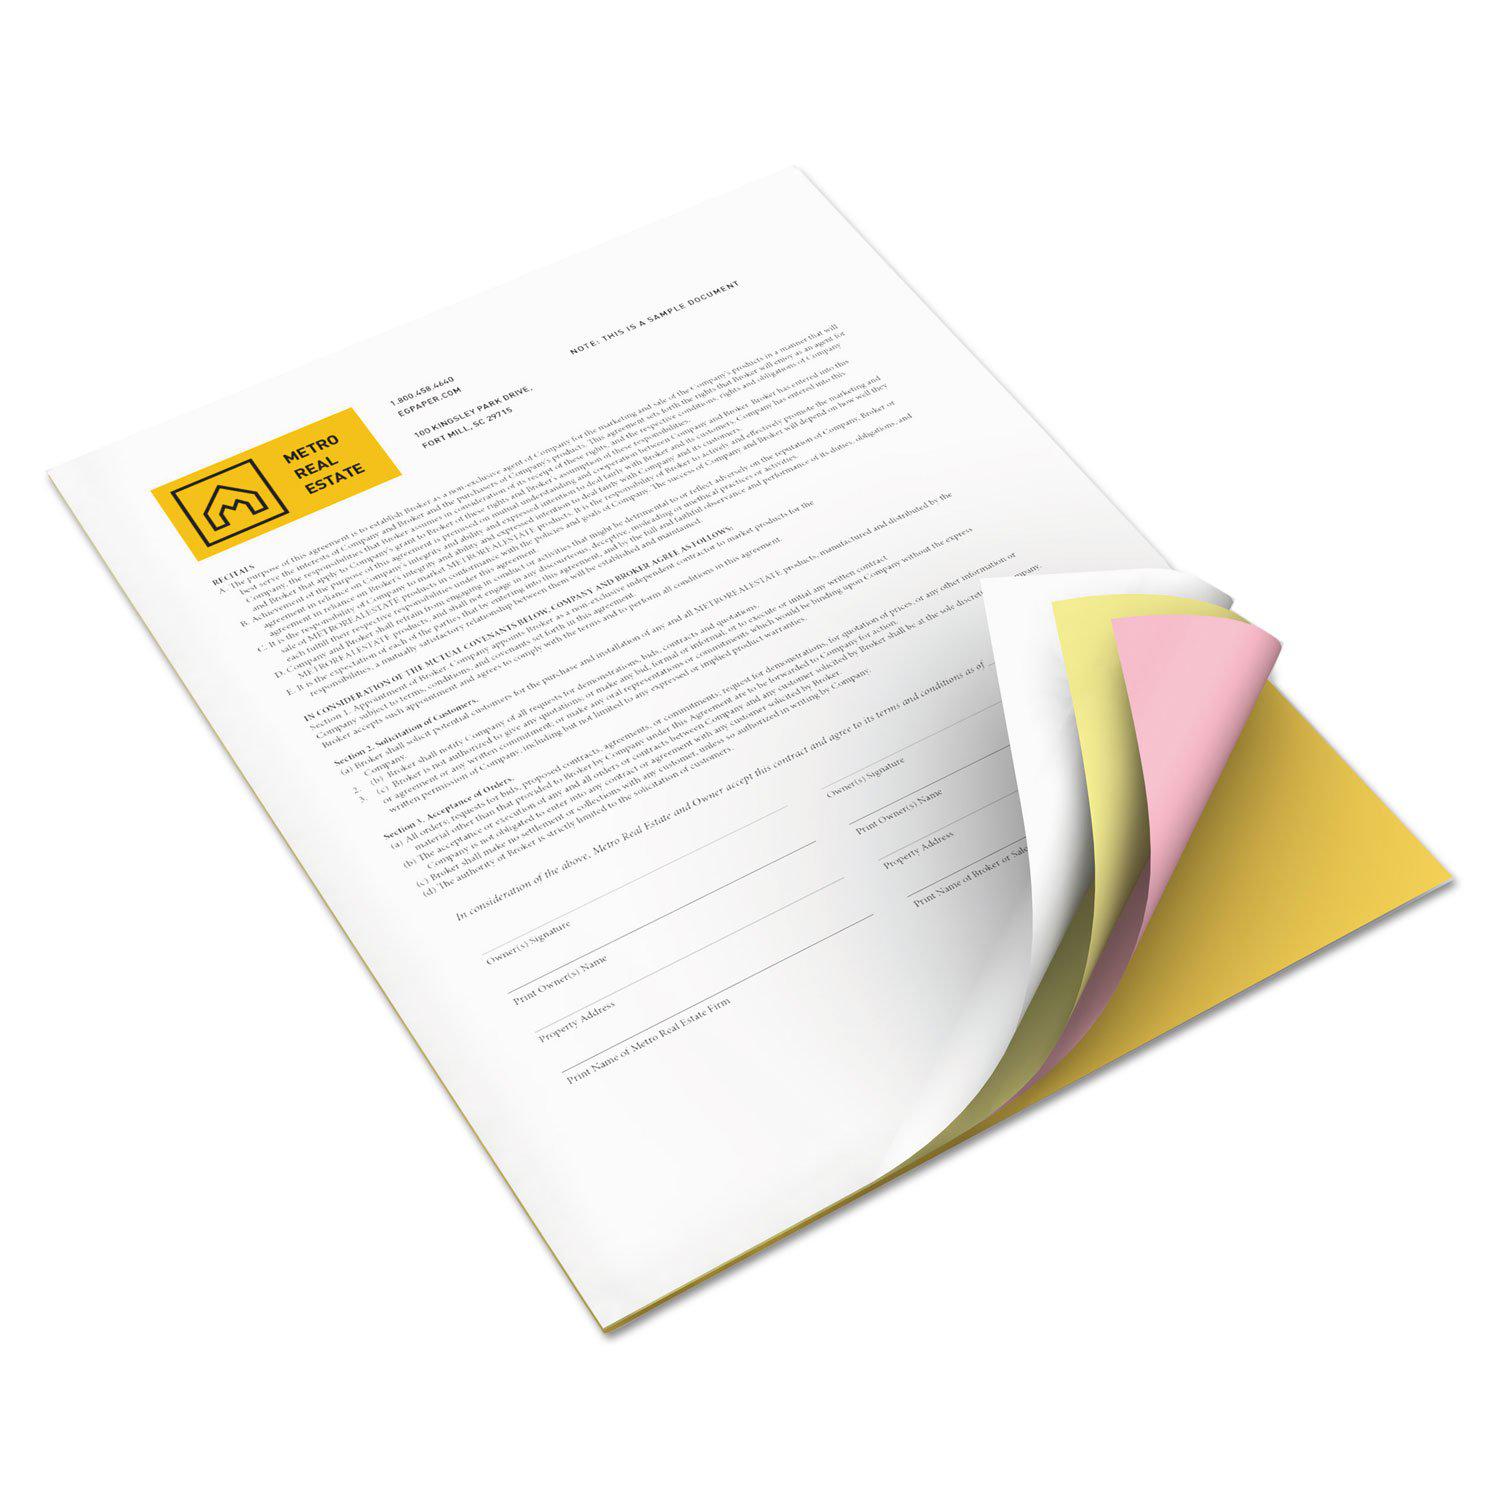 Xerox Vitality Multipurpose Carbonless 4-Part Paper, 8.5 x 11, Goldenrod/Pink/Canary/White, 5,000/Carton